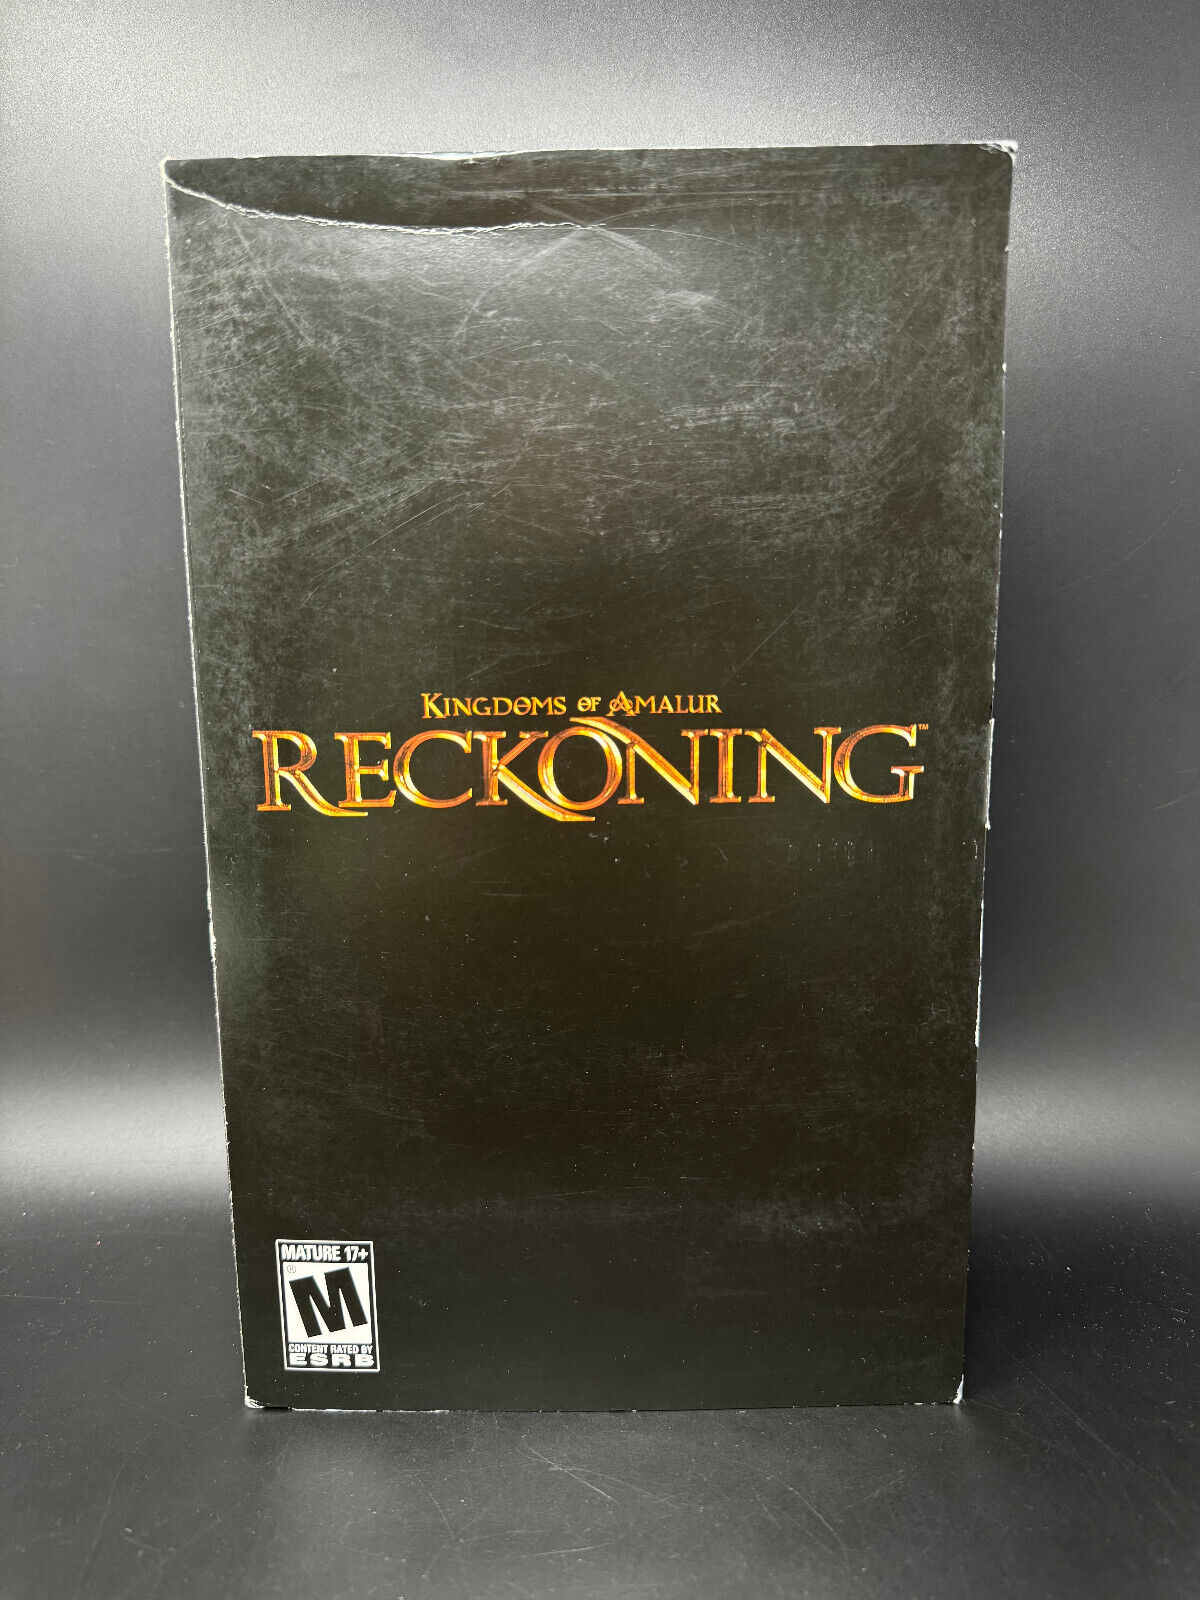 Kingdoms of Amalur: Reckoning - Special Edition PC